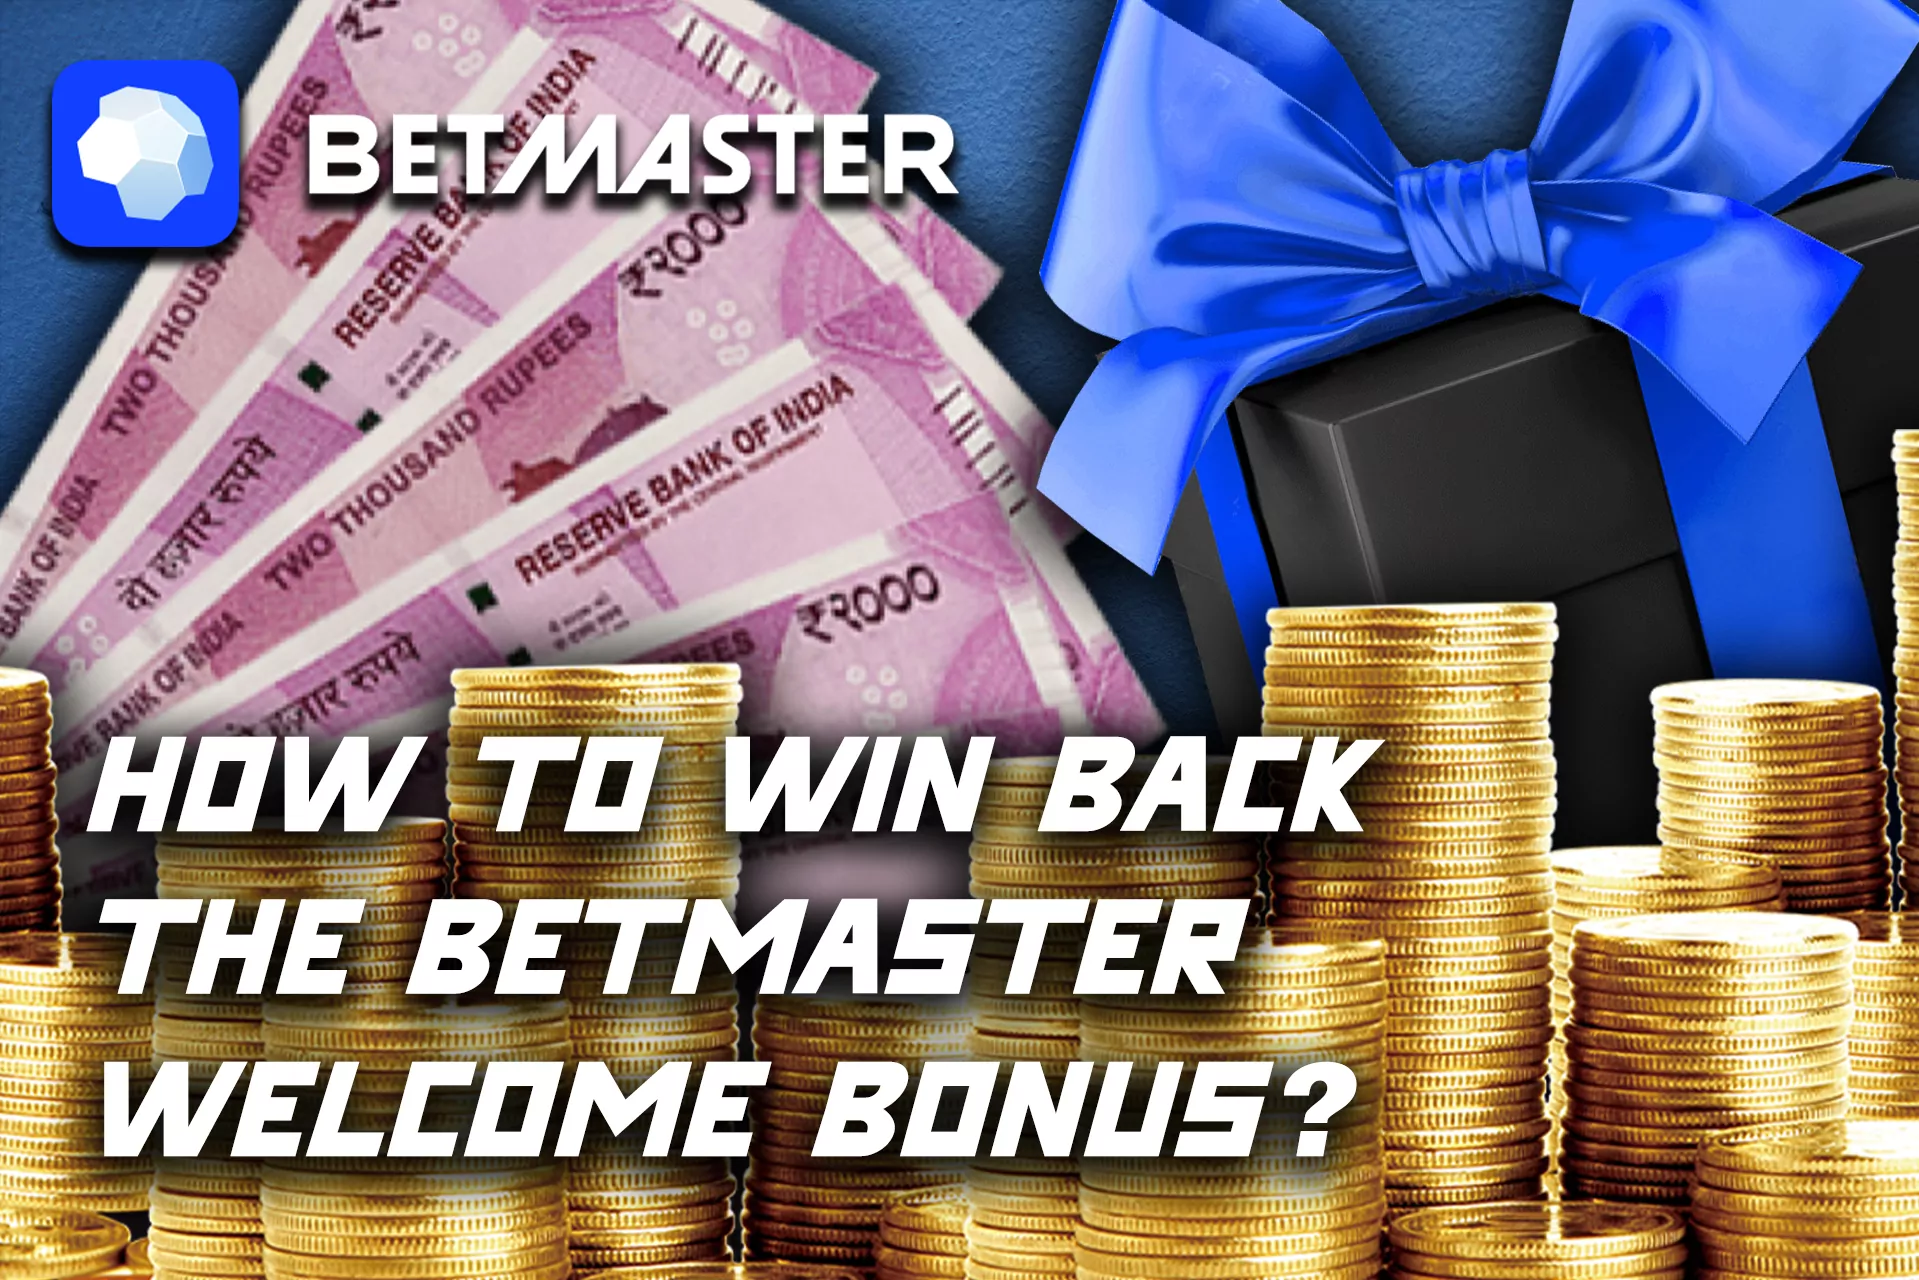 You should meet wagering requirements to win back the bonus.